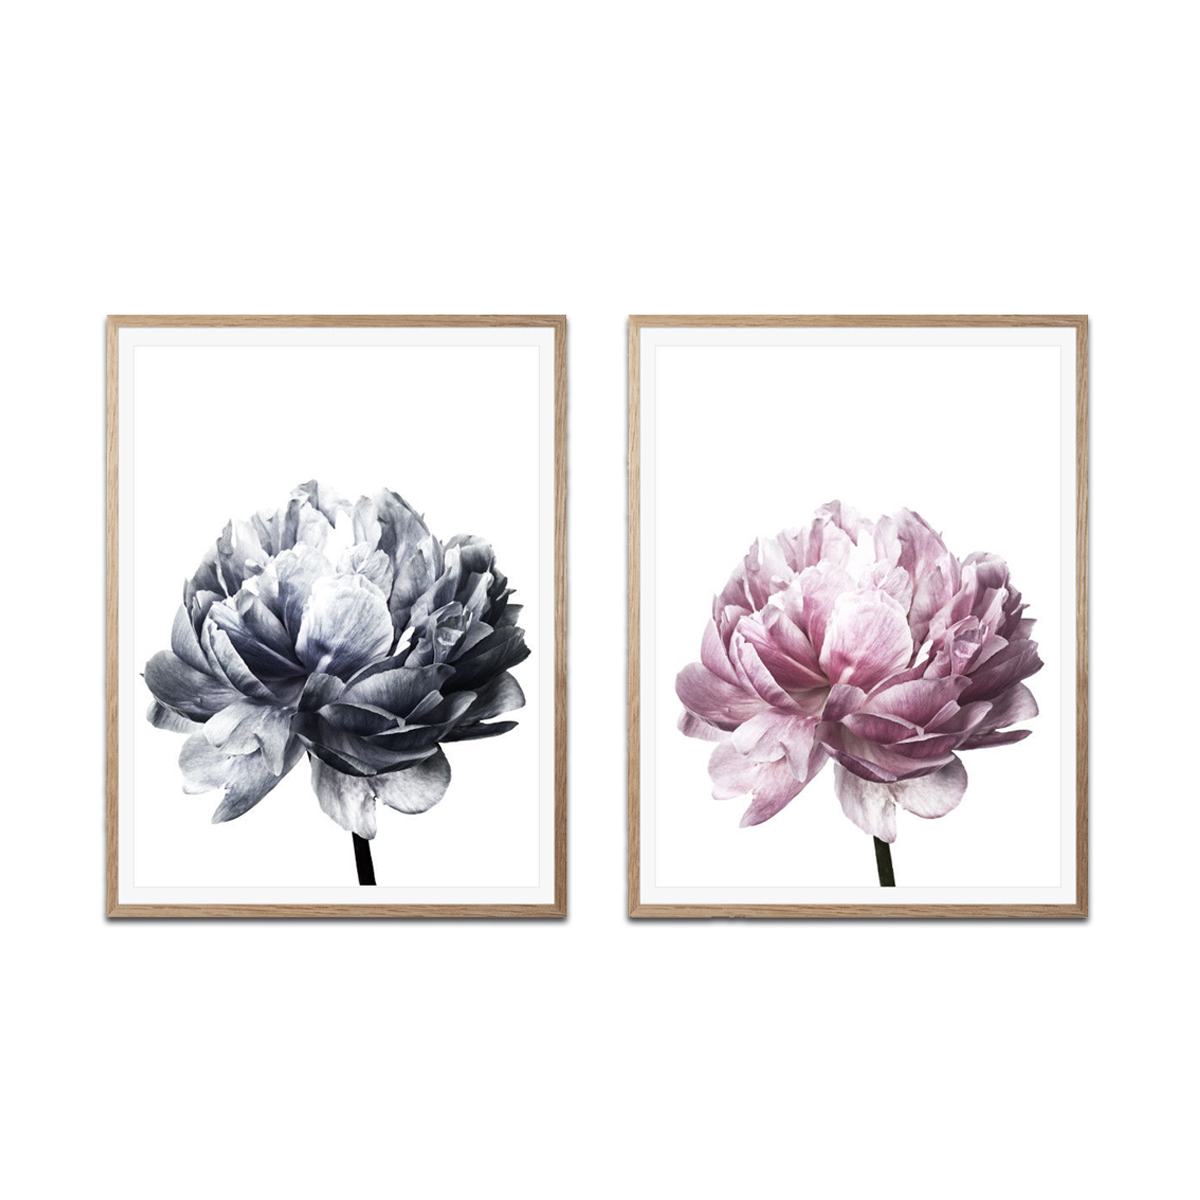 20x3030x40cm-Flower-Modern-Wall-Art-Canvas-Paintings-Picture-Home-Decor-Mural-Poster-with-Frame-1632681-4